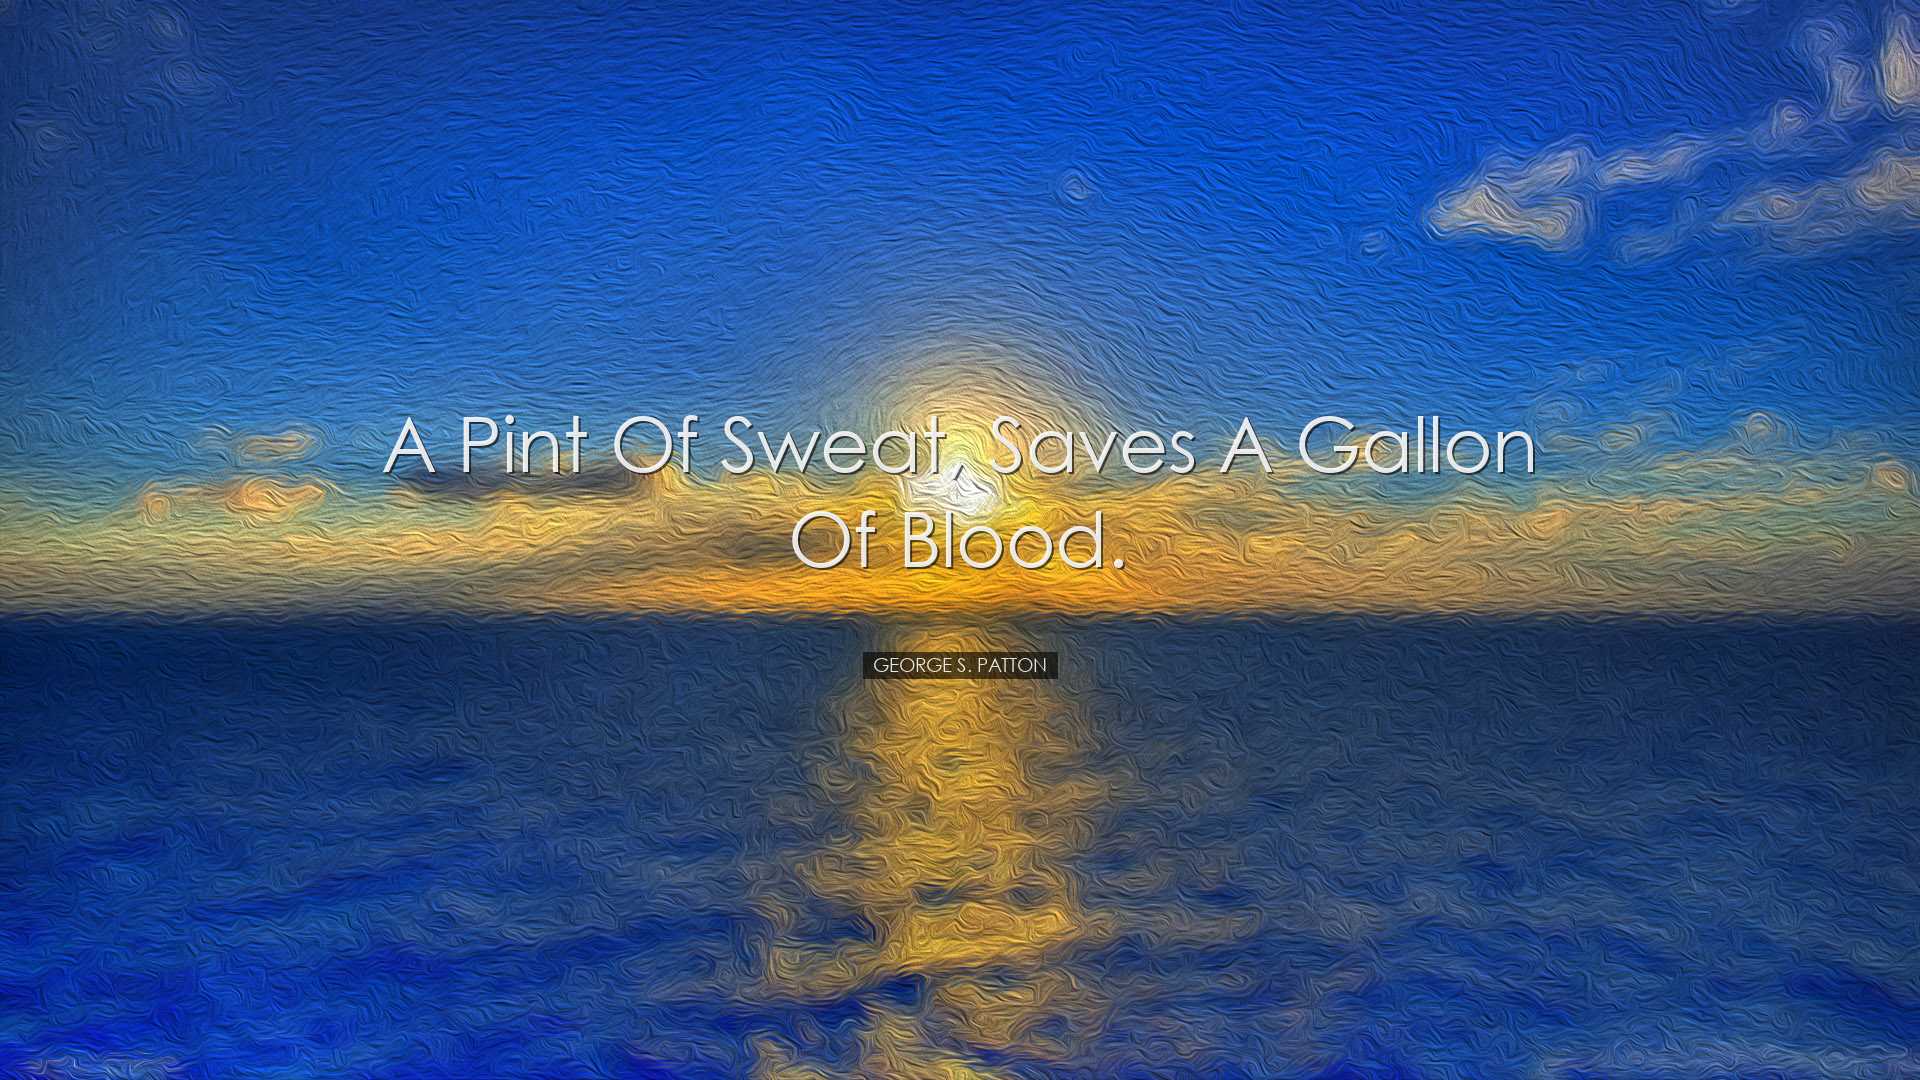 A pint of sweat, saves a gallon of blood. - George S. Patton